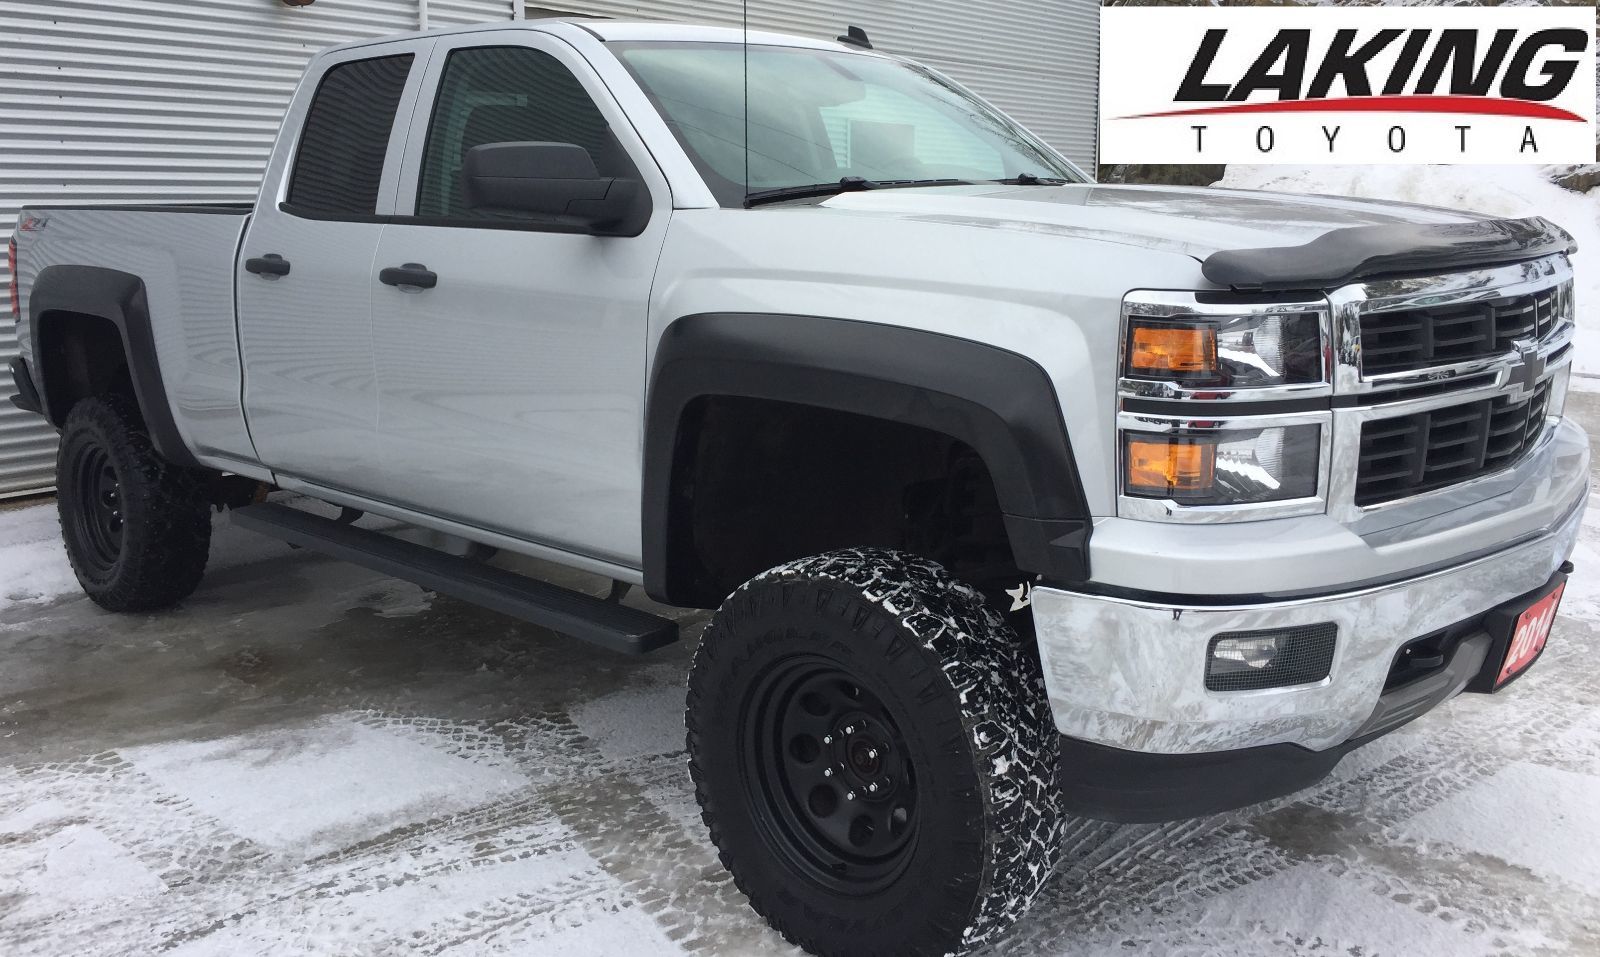 Used 2014 Chevrolet Silverado 1500 Z71 4X4 OFF ROAD DOUBLE CAB WITH 6" LIFT KIT in Sudbury | 22860A 6 Lift Kit For 2014 Chevy Silverado 1500